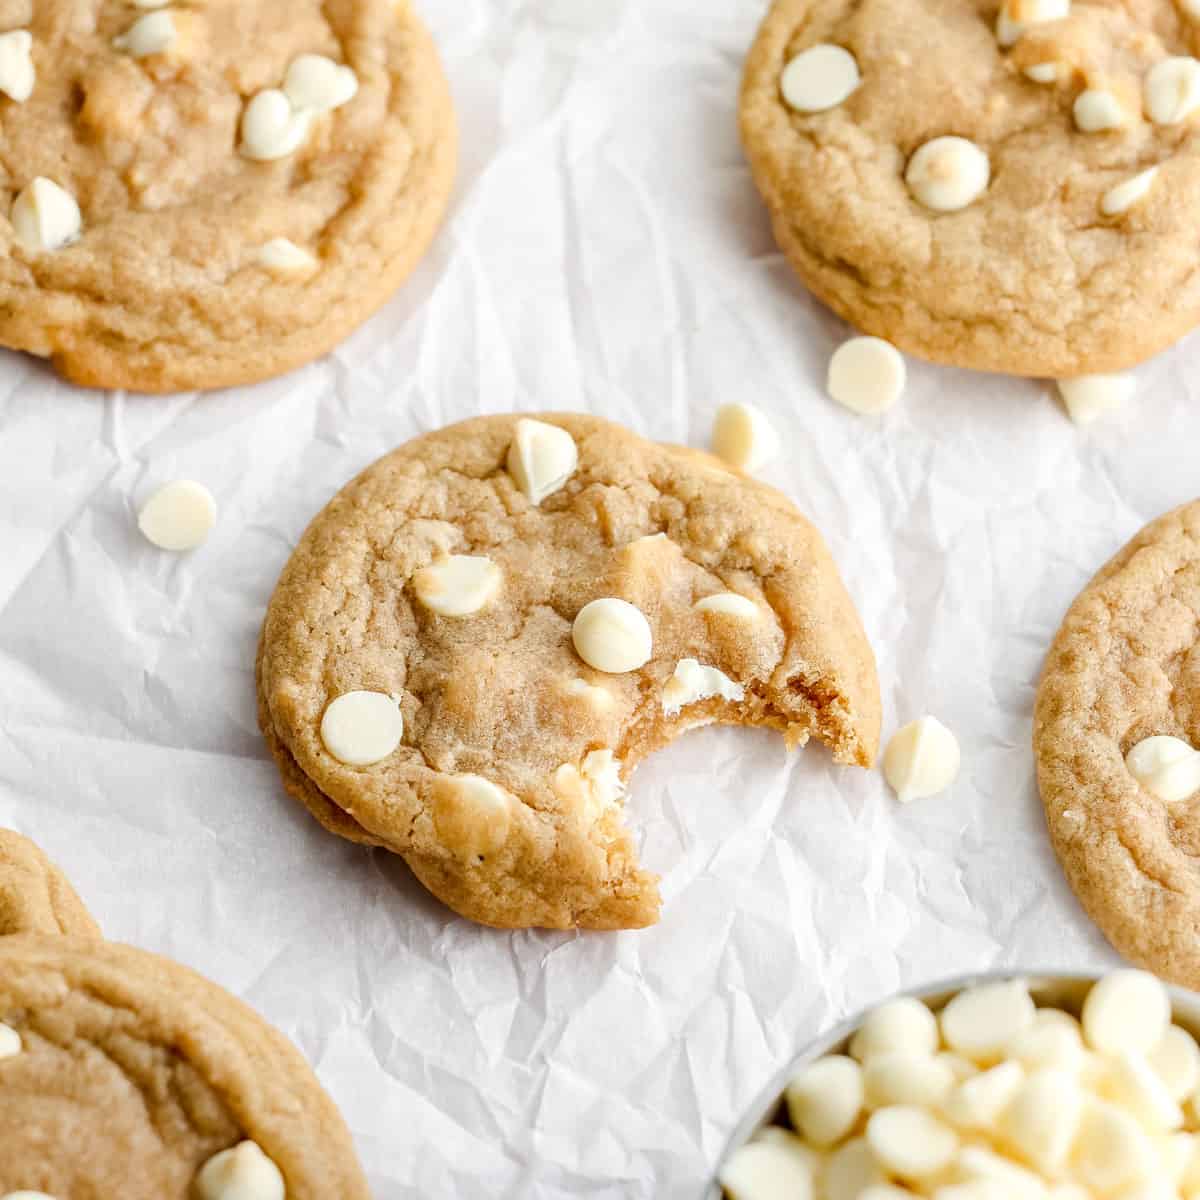 A bitten white chocolate chip cookie on a white surface. Other cookies and white chocolate chips surround it.